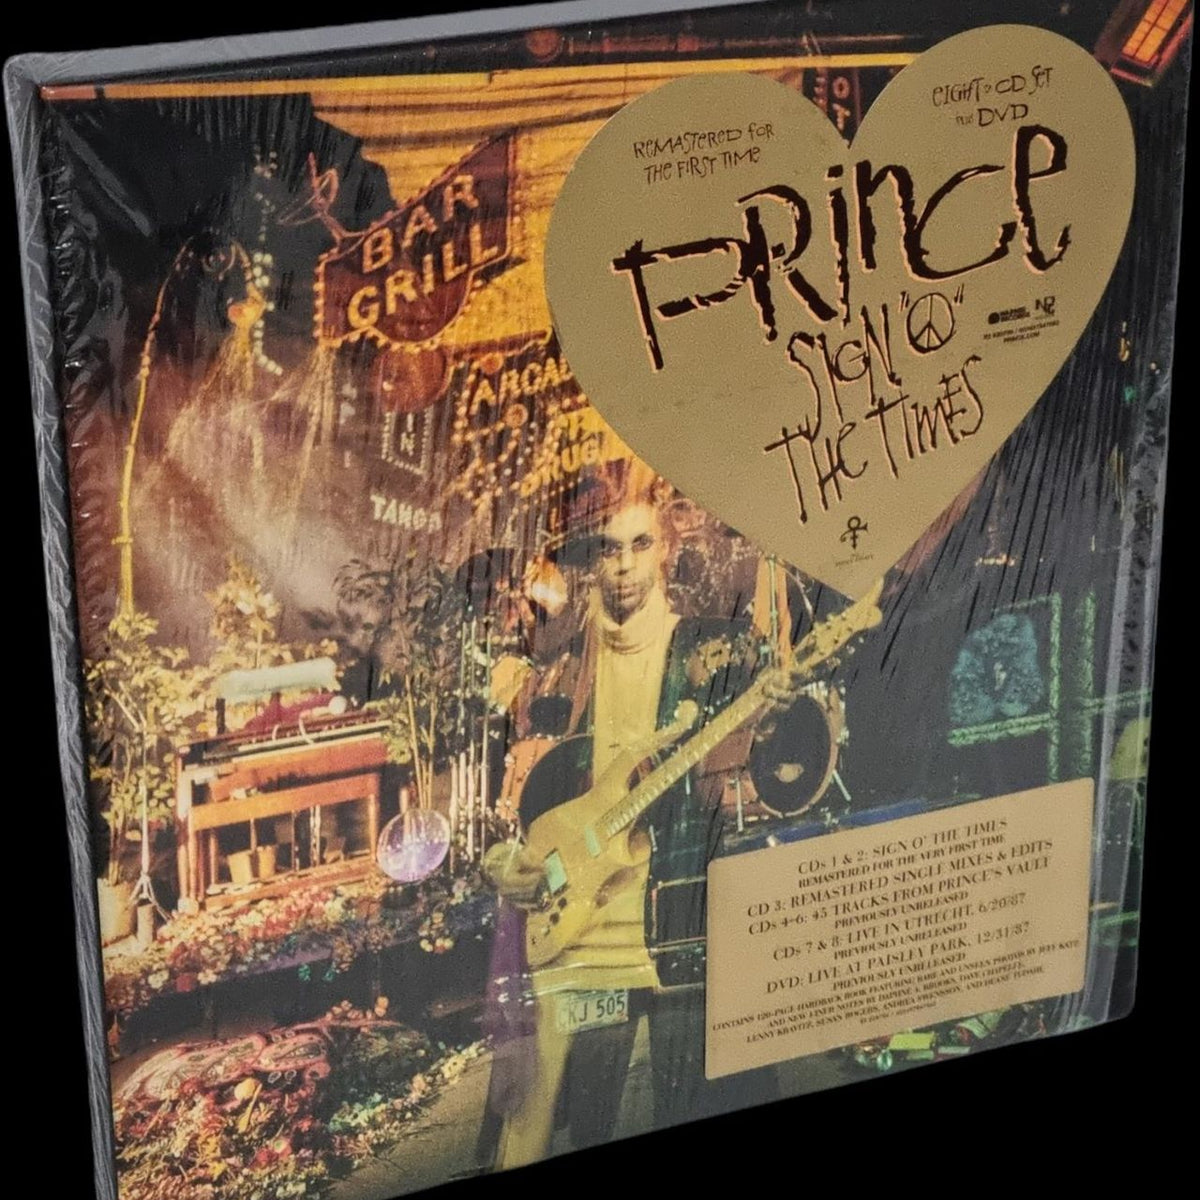 Prince Sign O' The Times - 8CD+DVD - Super Deluxe Edition UK Cd 